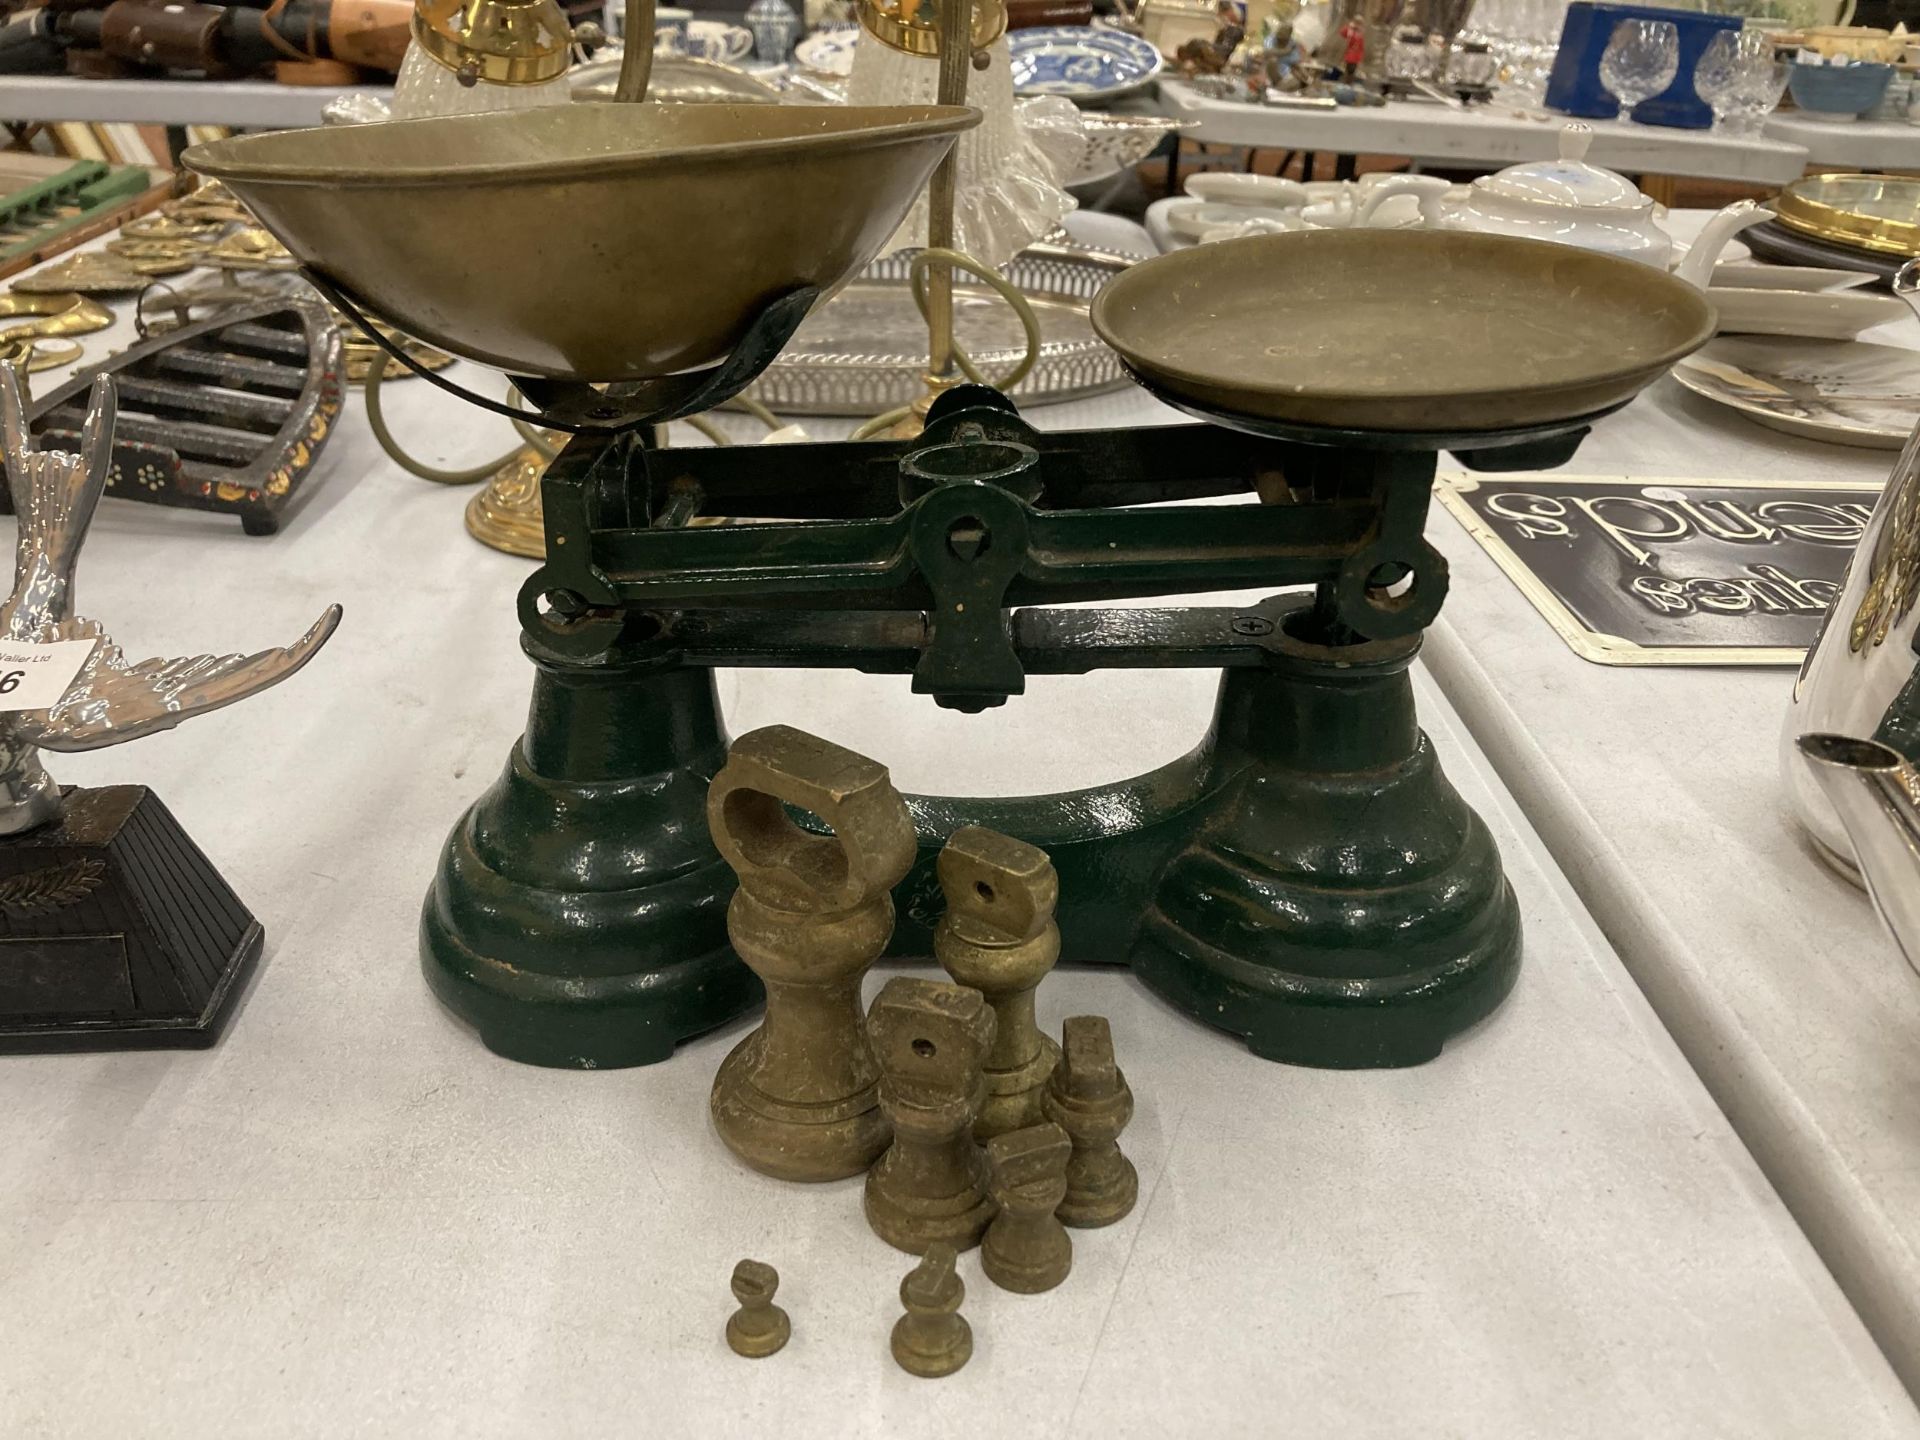 A SET OF SMALL VINTAGE LIBRASCO SCALES WITH BRASS PANS AND WEIGHTS